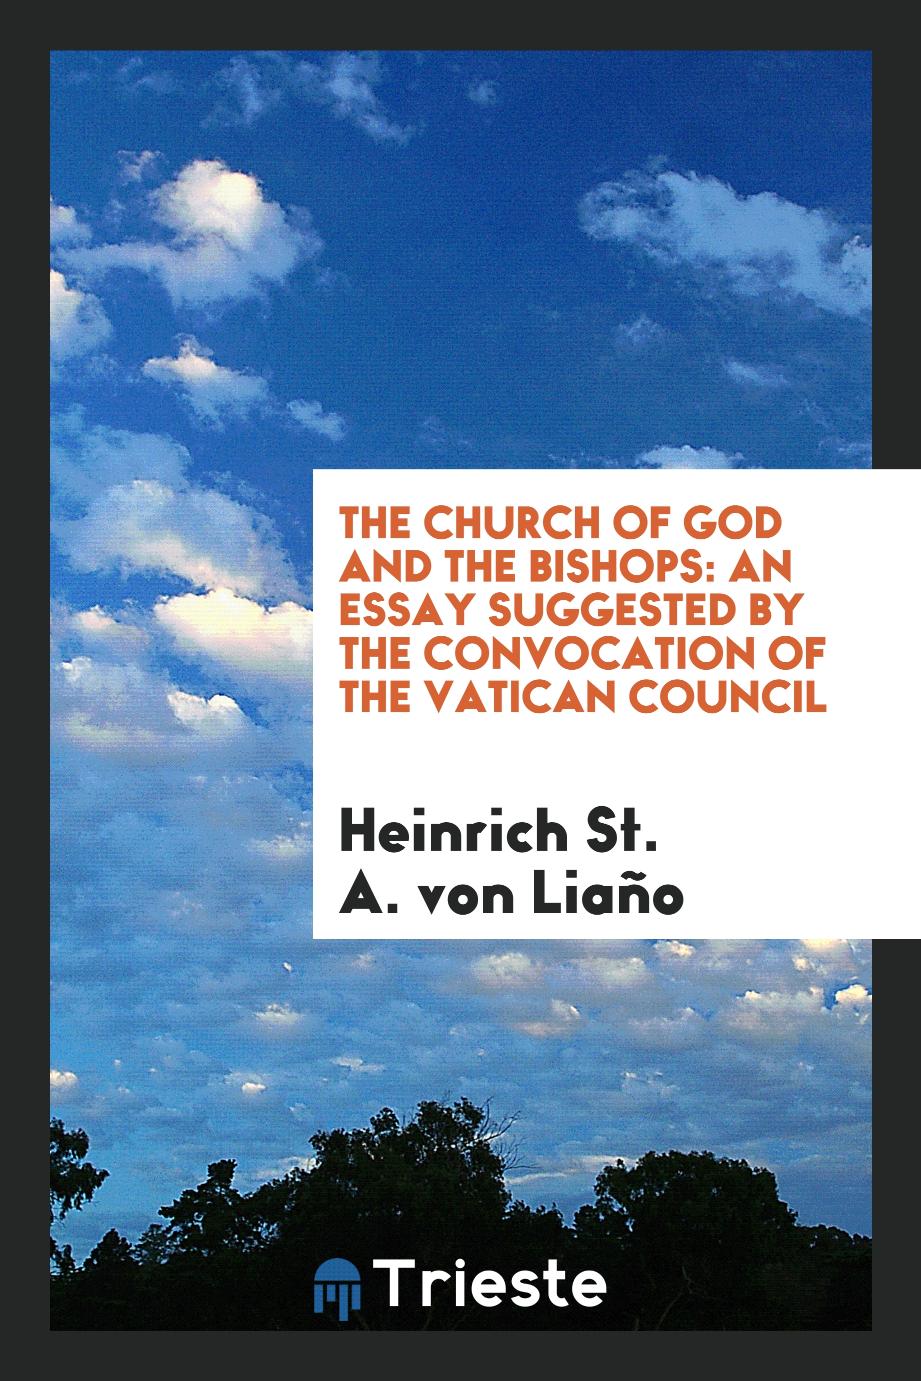 The church of God and the bishops: an essay suggested by the convocation of the Vatican Council